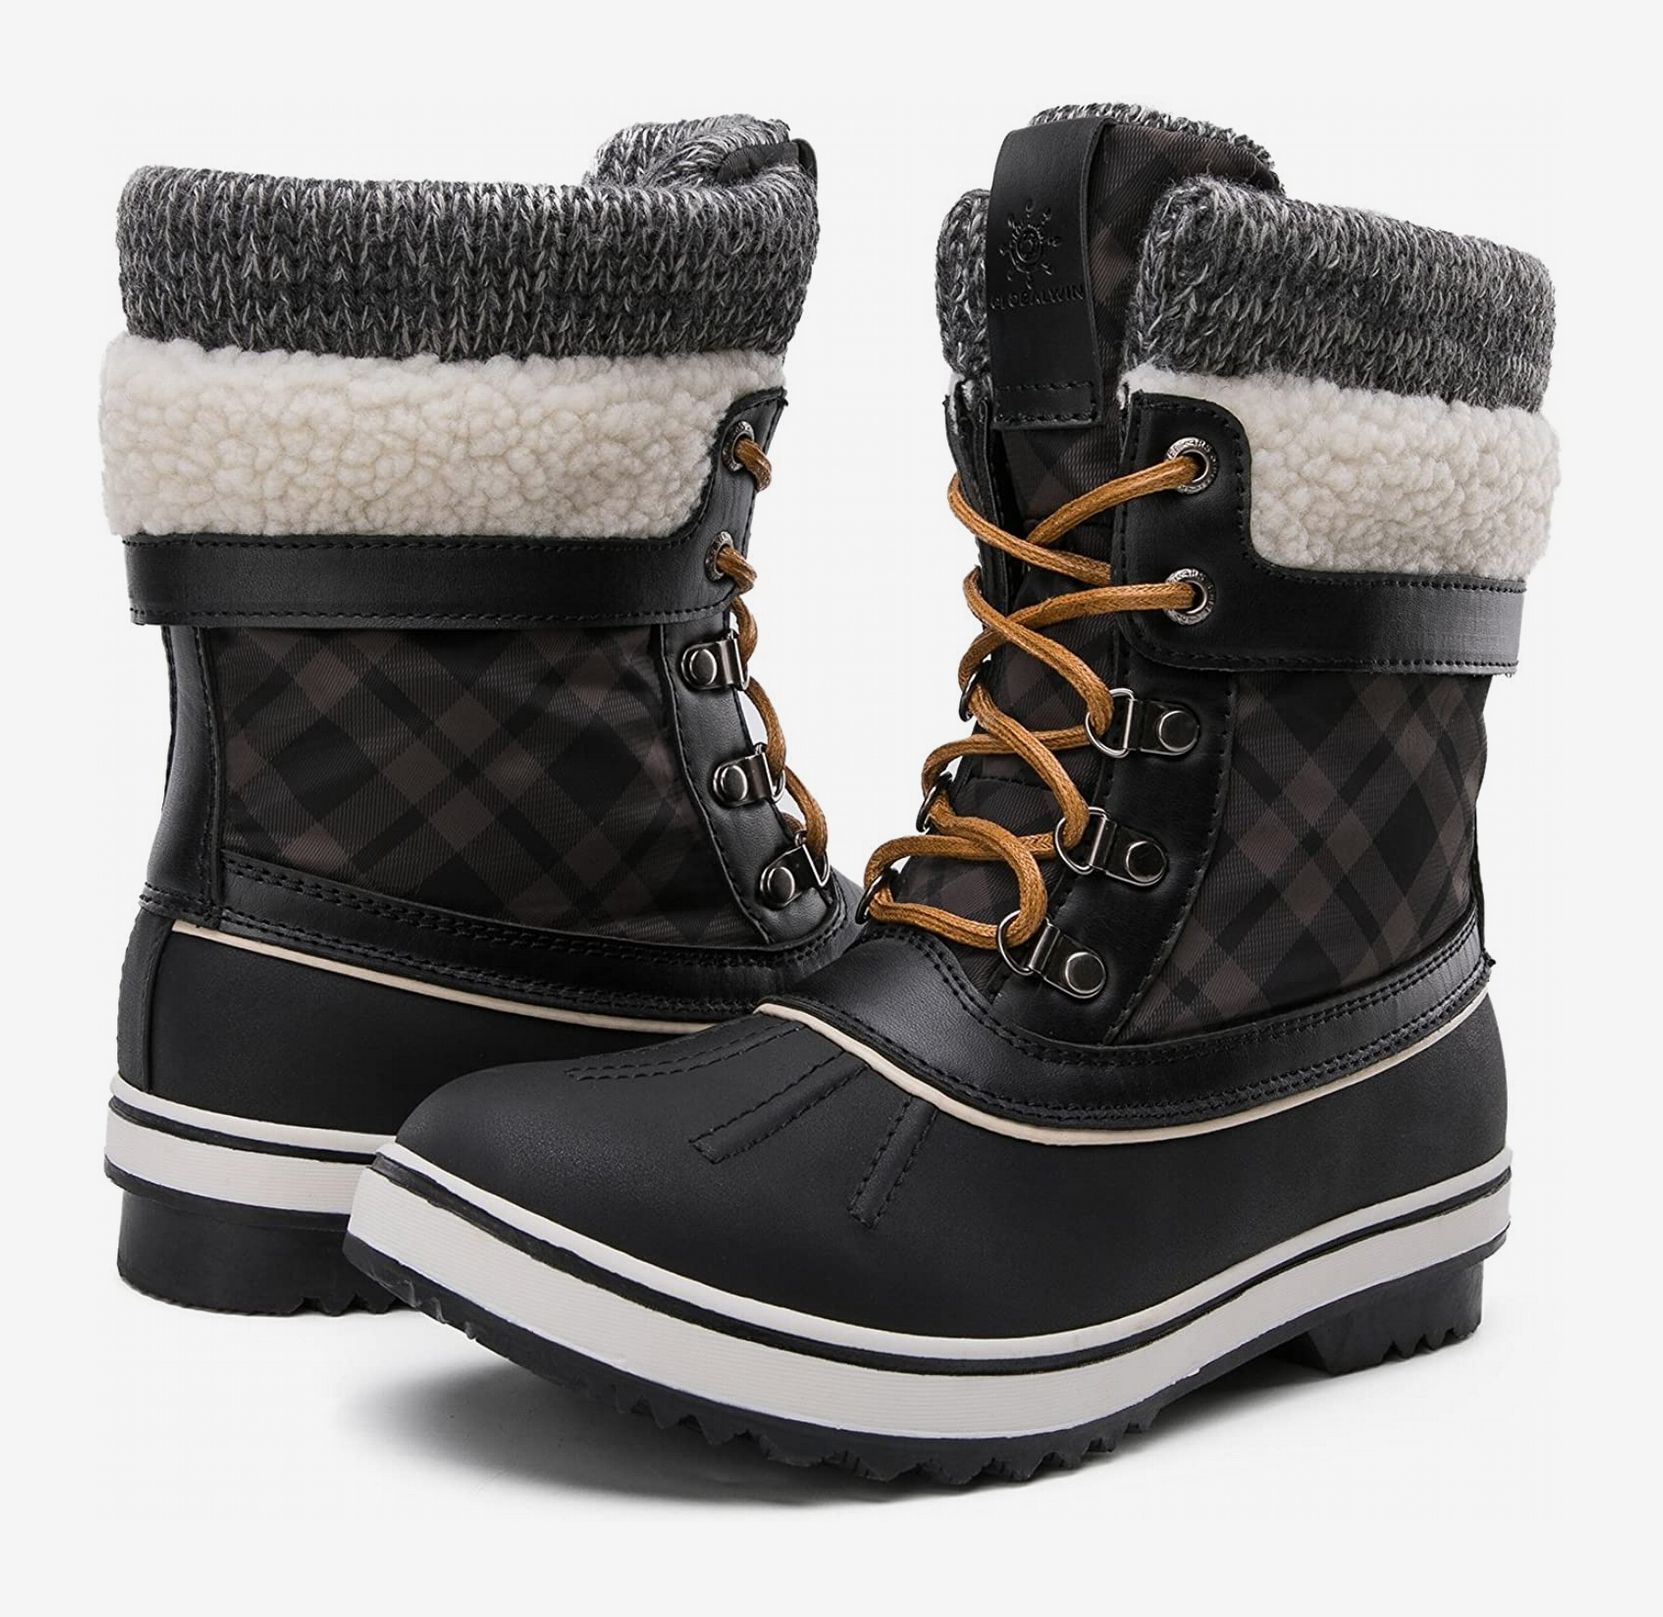 Buy > cute boots for winter > in stock